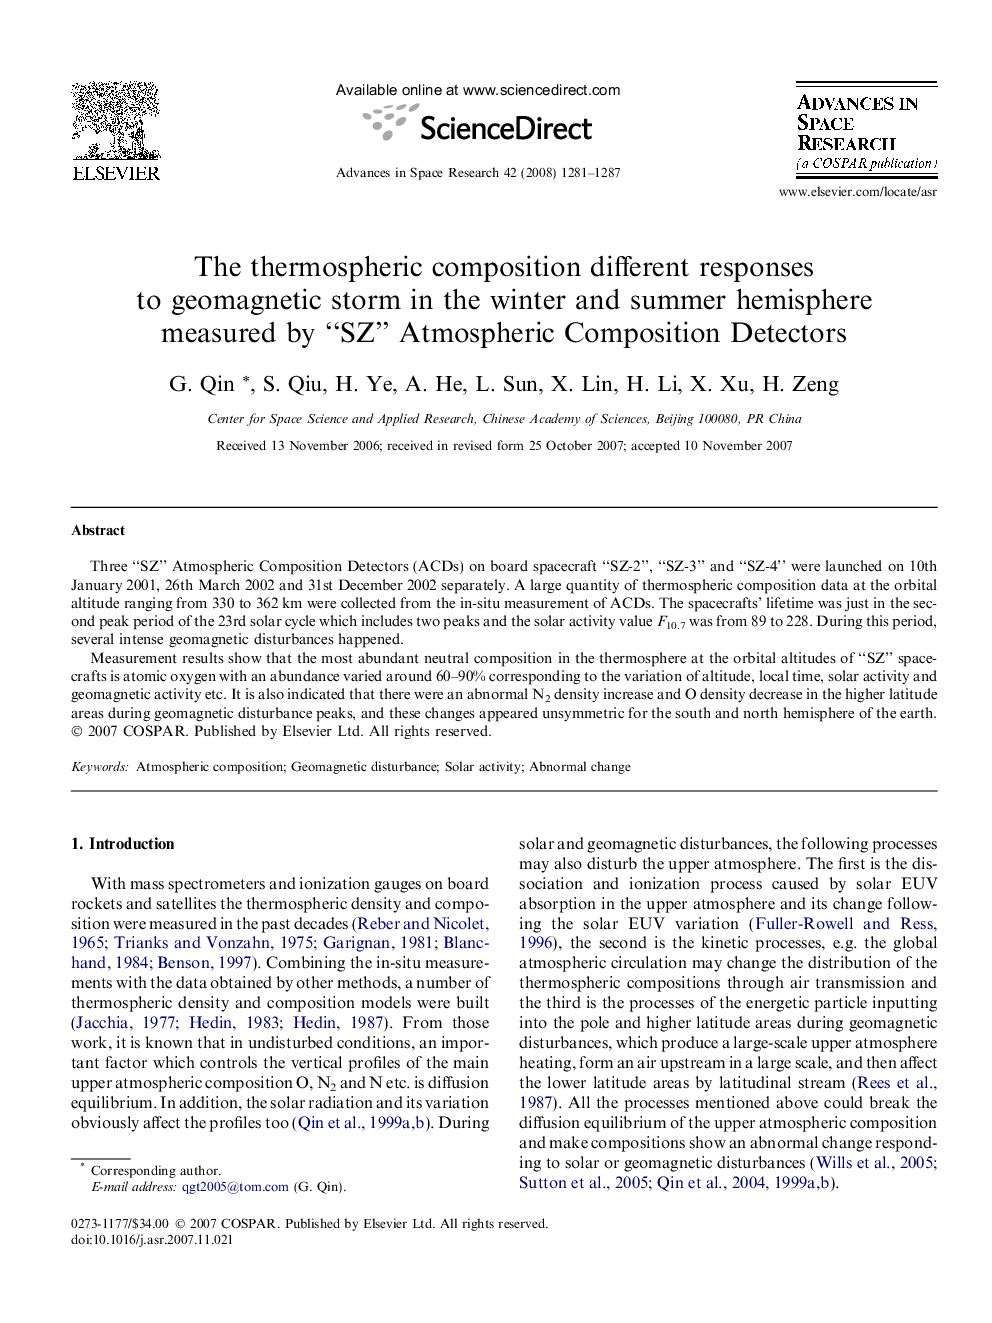 The thermospheric composition different responses to geomagnetic storm in the winter and summer hemisphere measured by “SZ” Atmospheric Composition Detectors